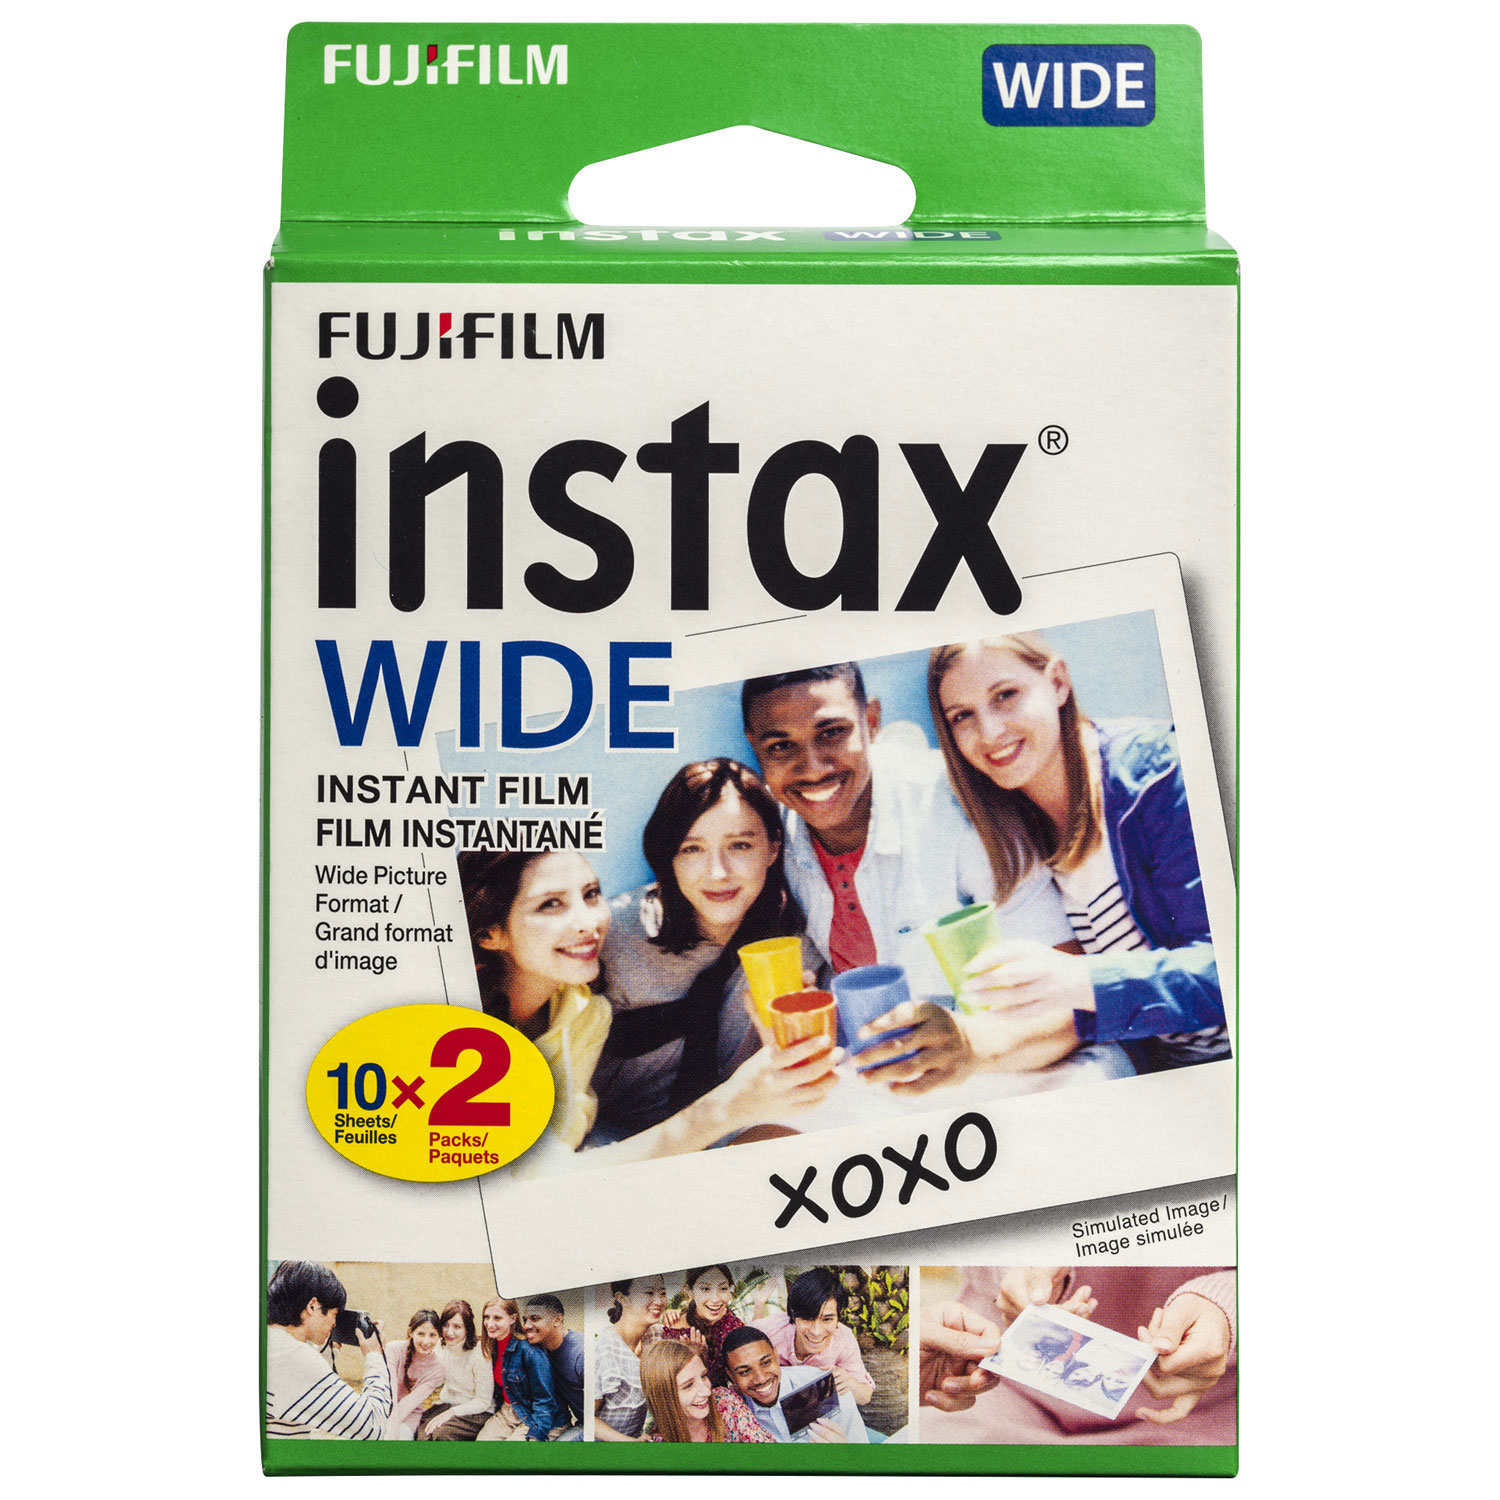 Fujifilm Instax Wide 2-Pack Instant Film - 20 Sheets